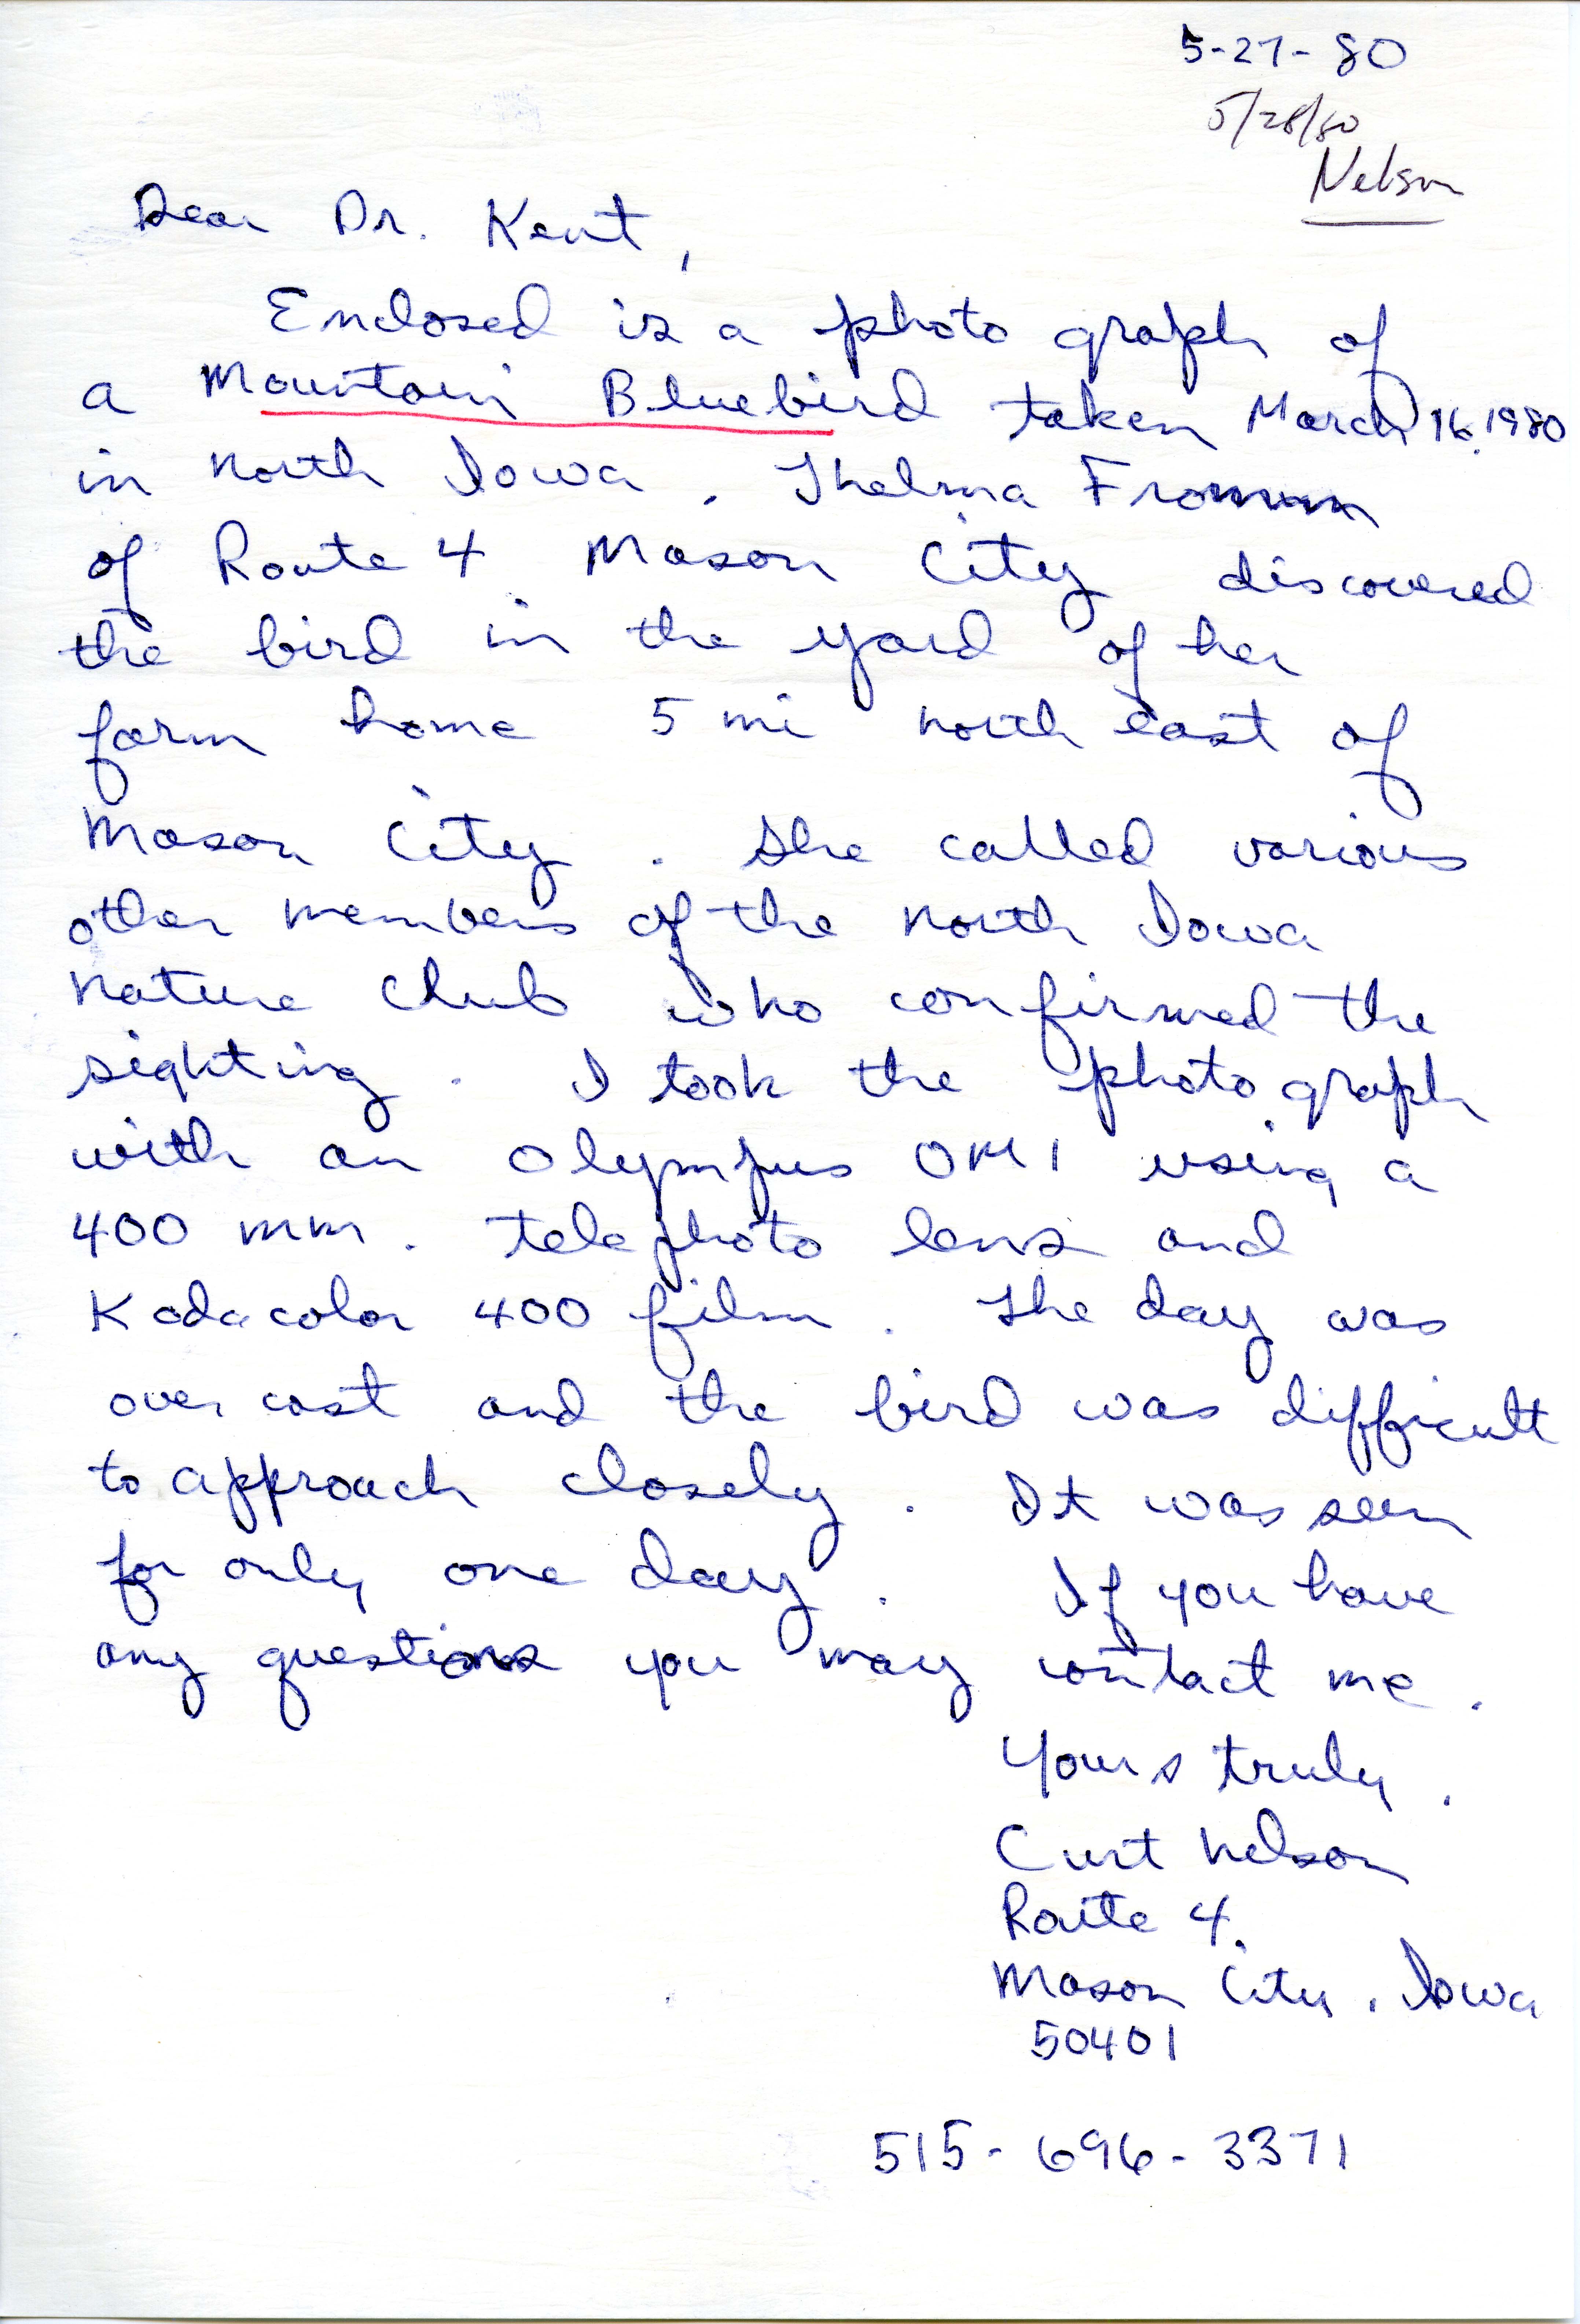 Curt Nelson letter to Thomas H. Kent regarding a bird sighting, May 27, 1980